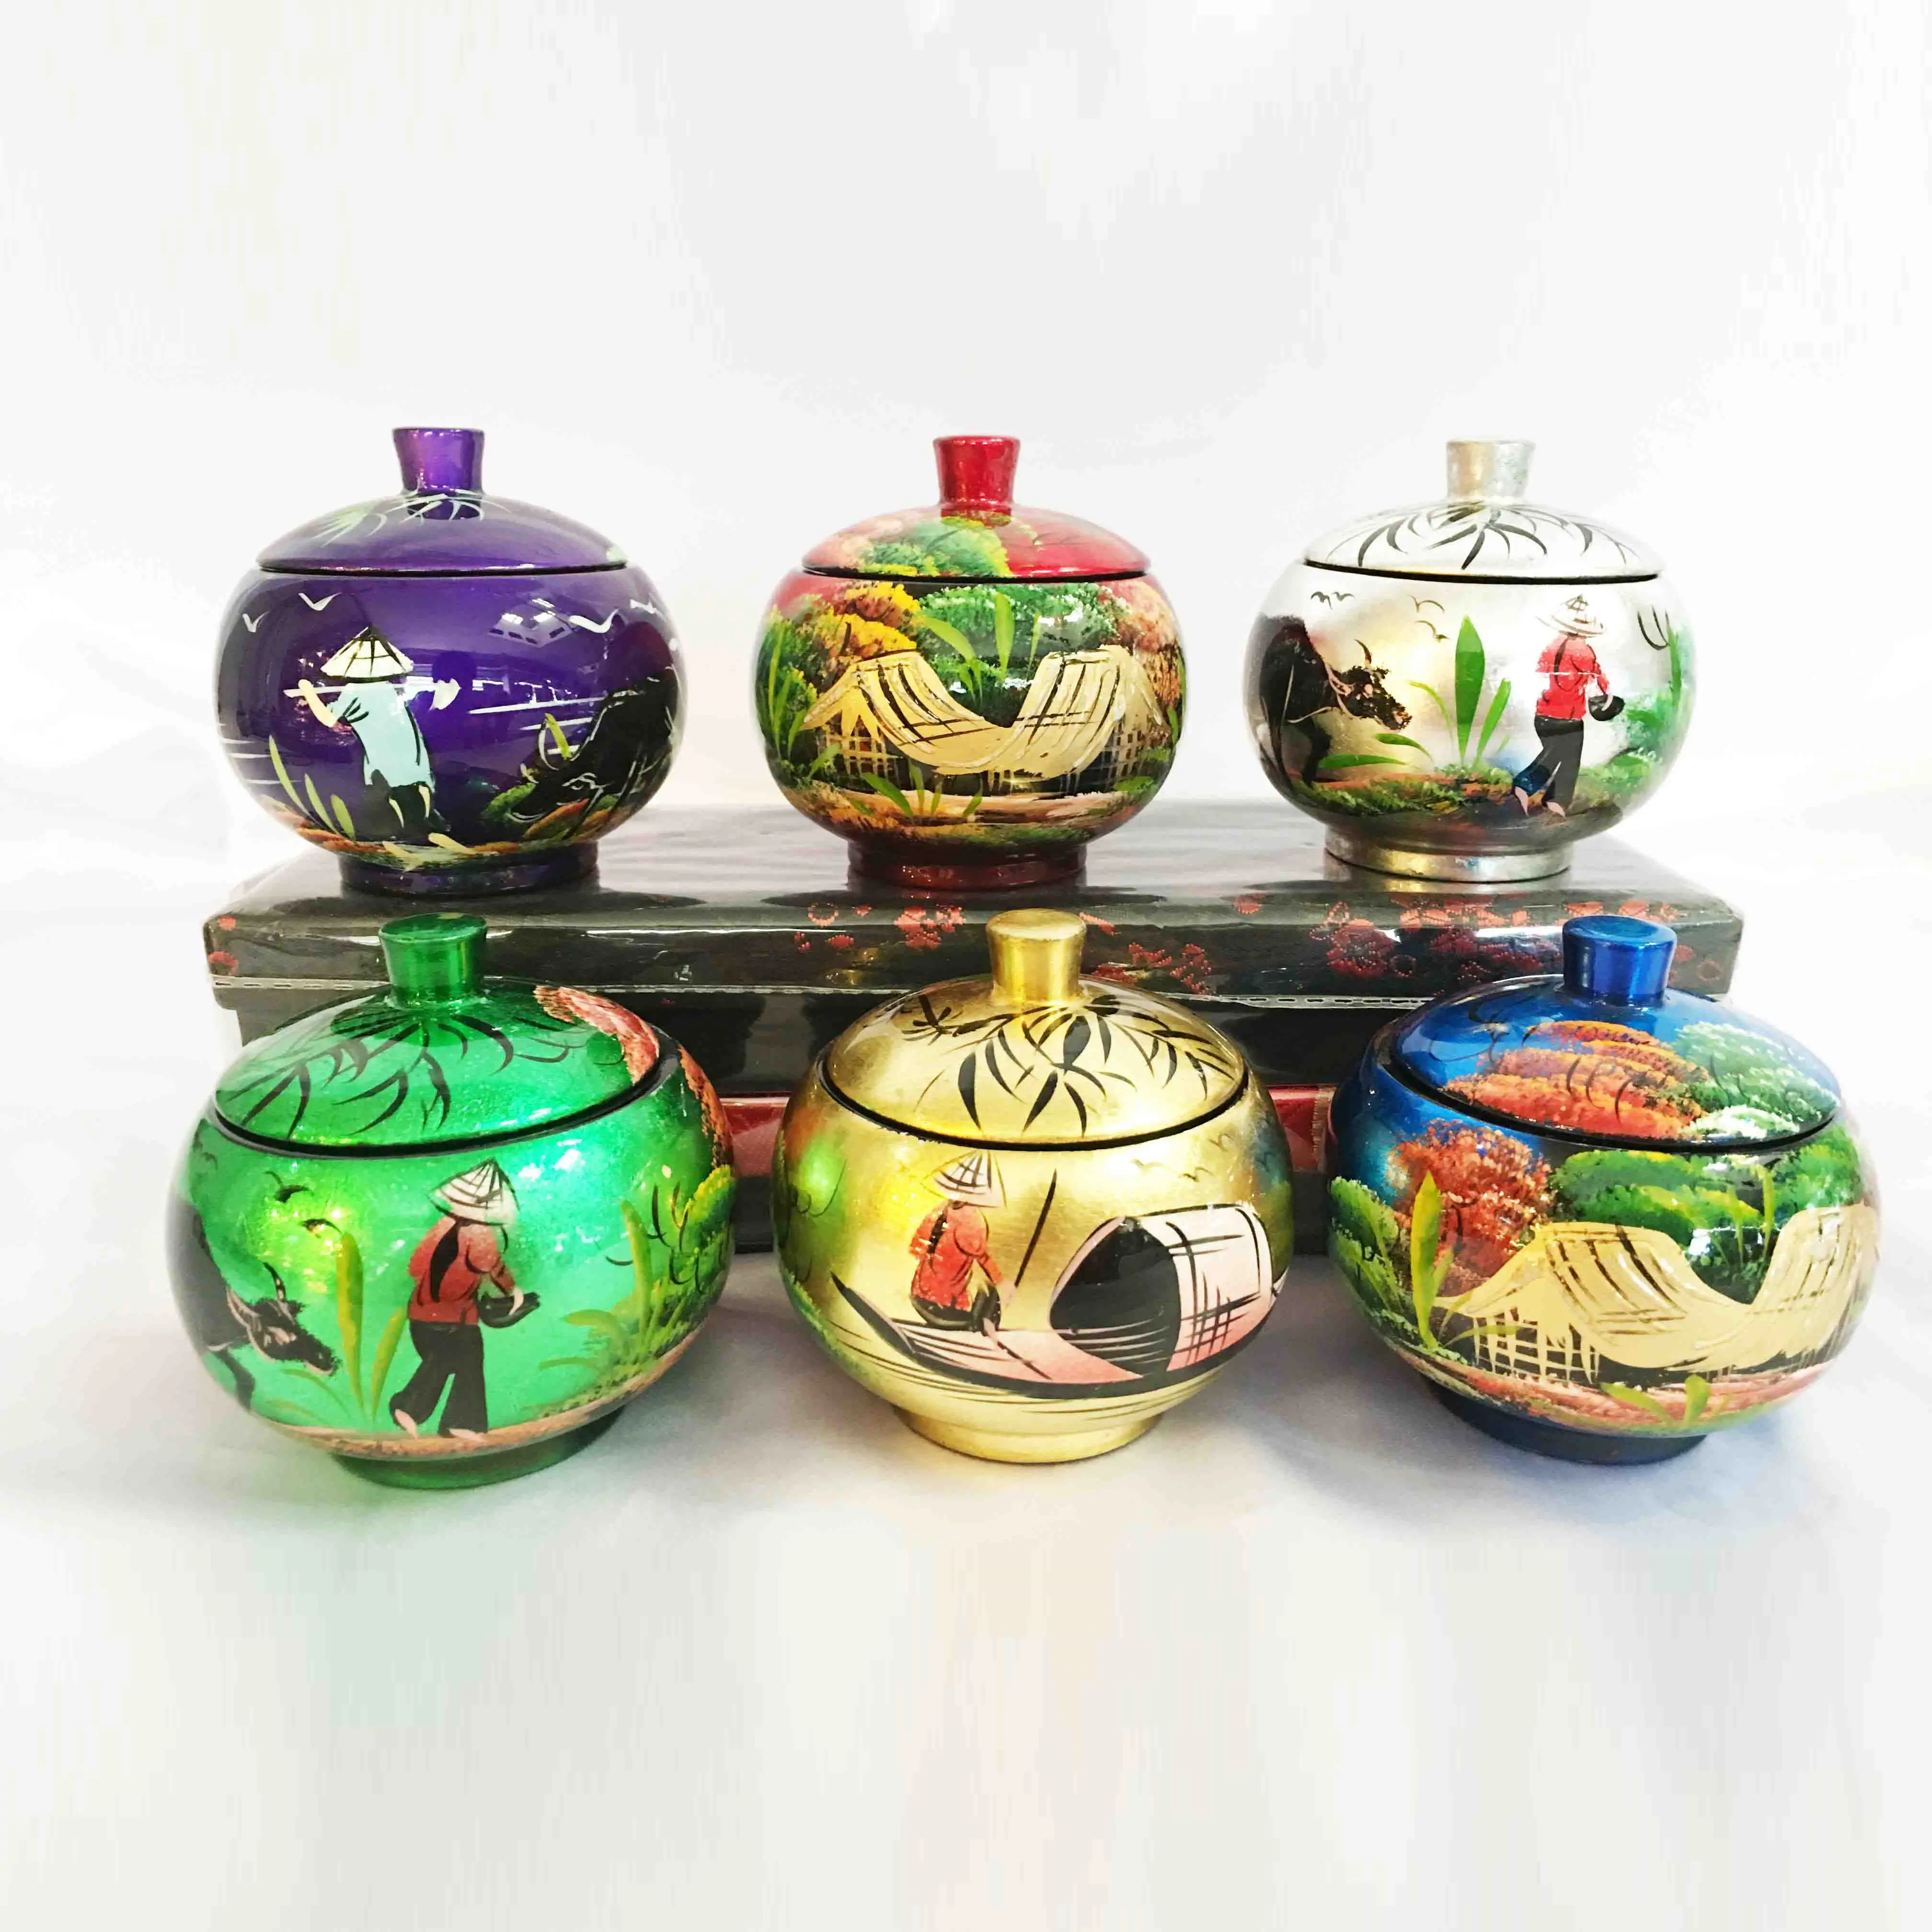 Luxury round lacquer jars small container jar candy storage containers decor gifts wholesale made in Vietnam